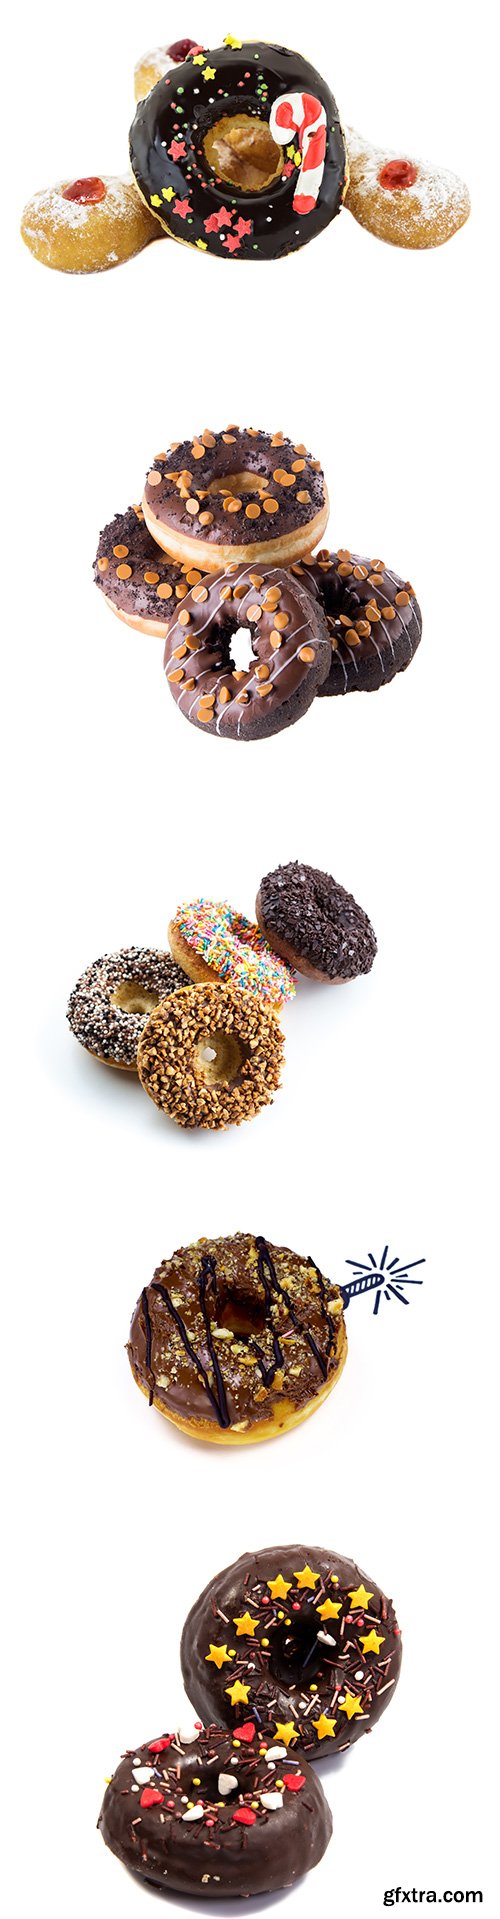 Donuts-3 Isolated - 20xJPGs